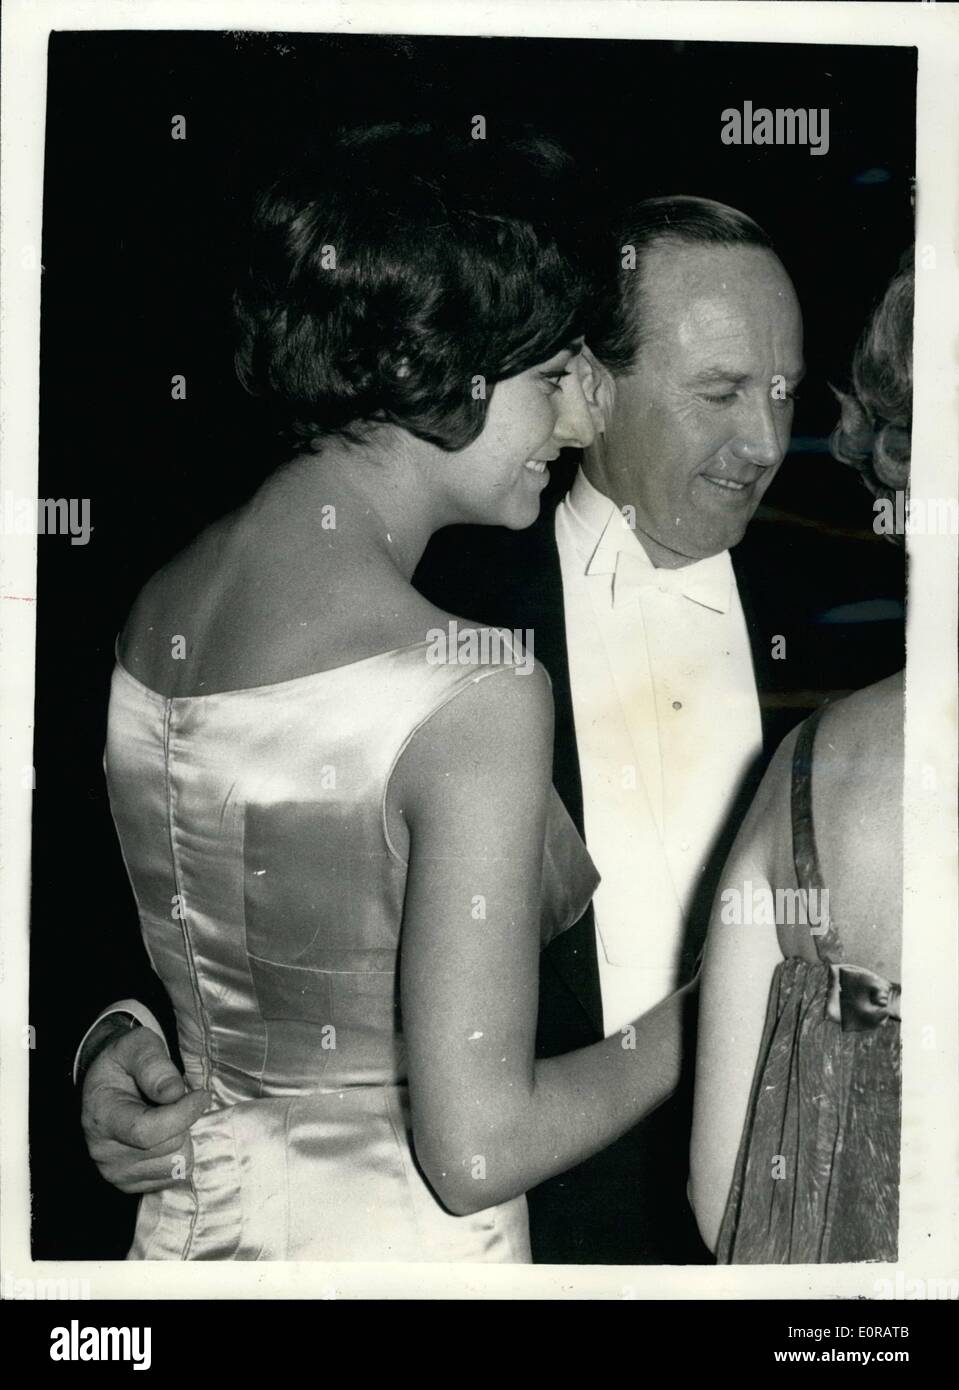 Nov. 11, 1958 - Mike Parker Escorts a New Girl Friend, Young Lady From Yugoslavia - Lieut. Commander Michael Parker -Friend of Prince Philip Attended the Lord Taverner's Ball at Grosvenor House Last night-in company of Luha Otasevio - A Young lady from Yugoslavia. Keystone Photo Shows:- ;Lieut Commander Michael Parker Dances with Luba Otasevio - at the ball last night. Stock Photo